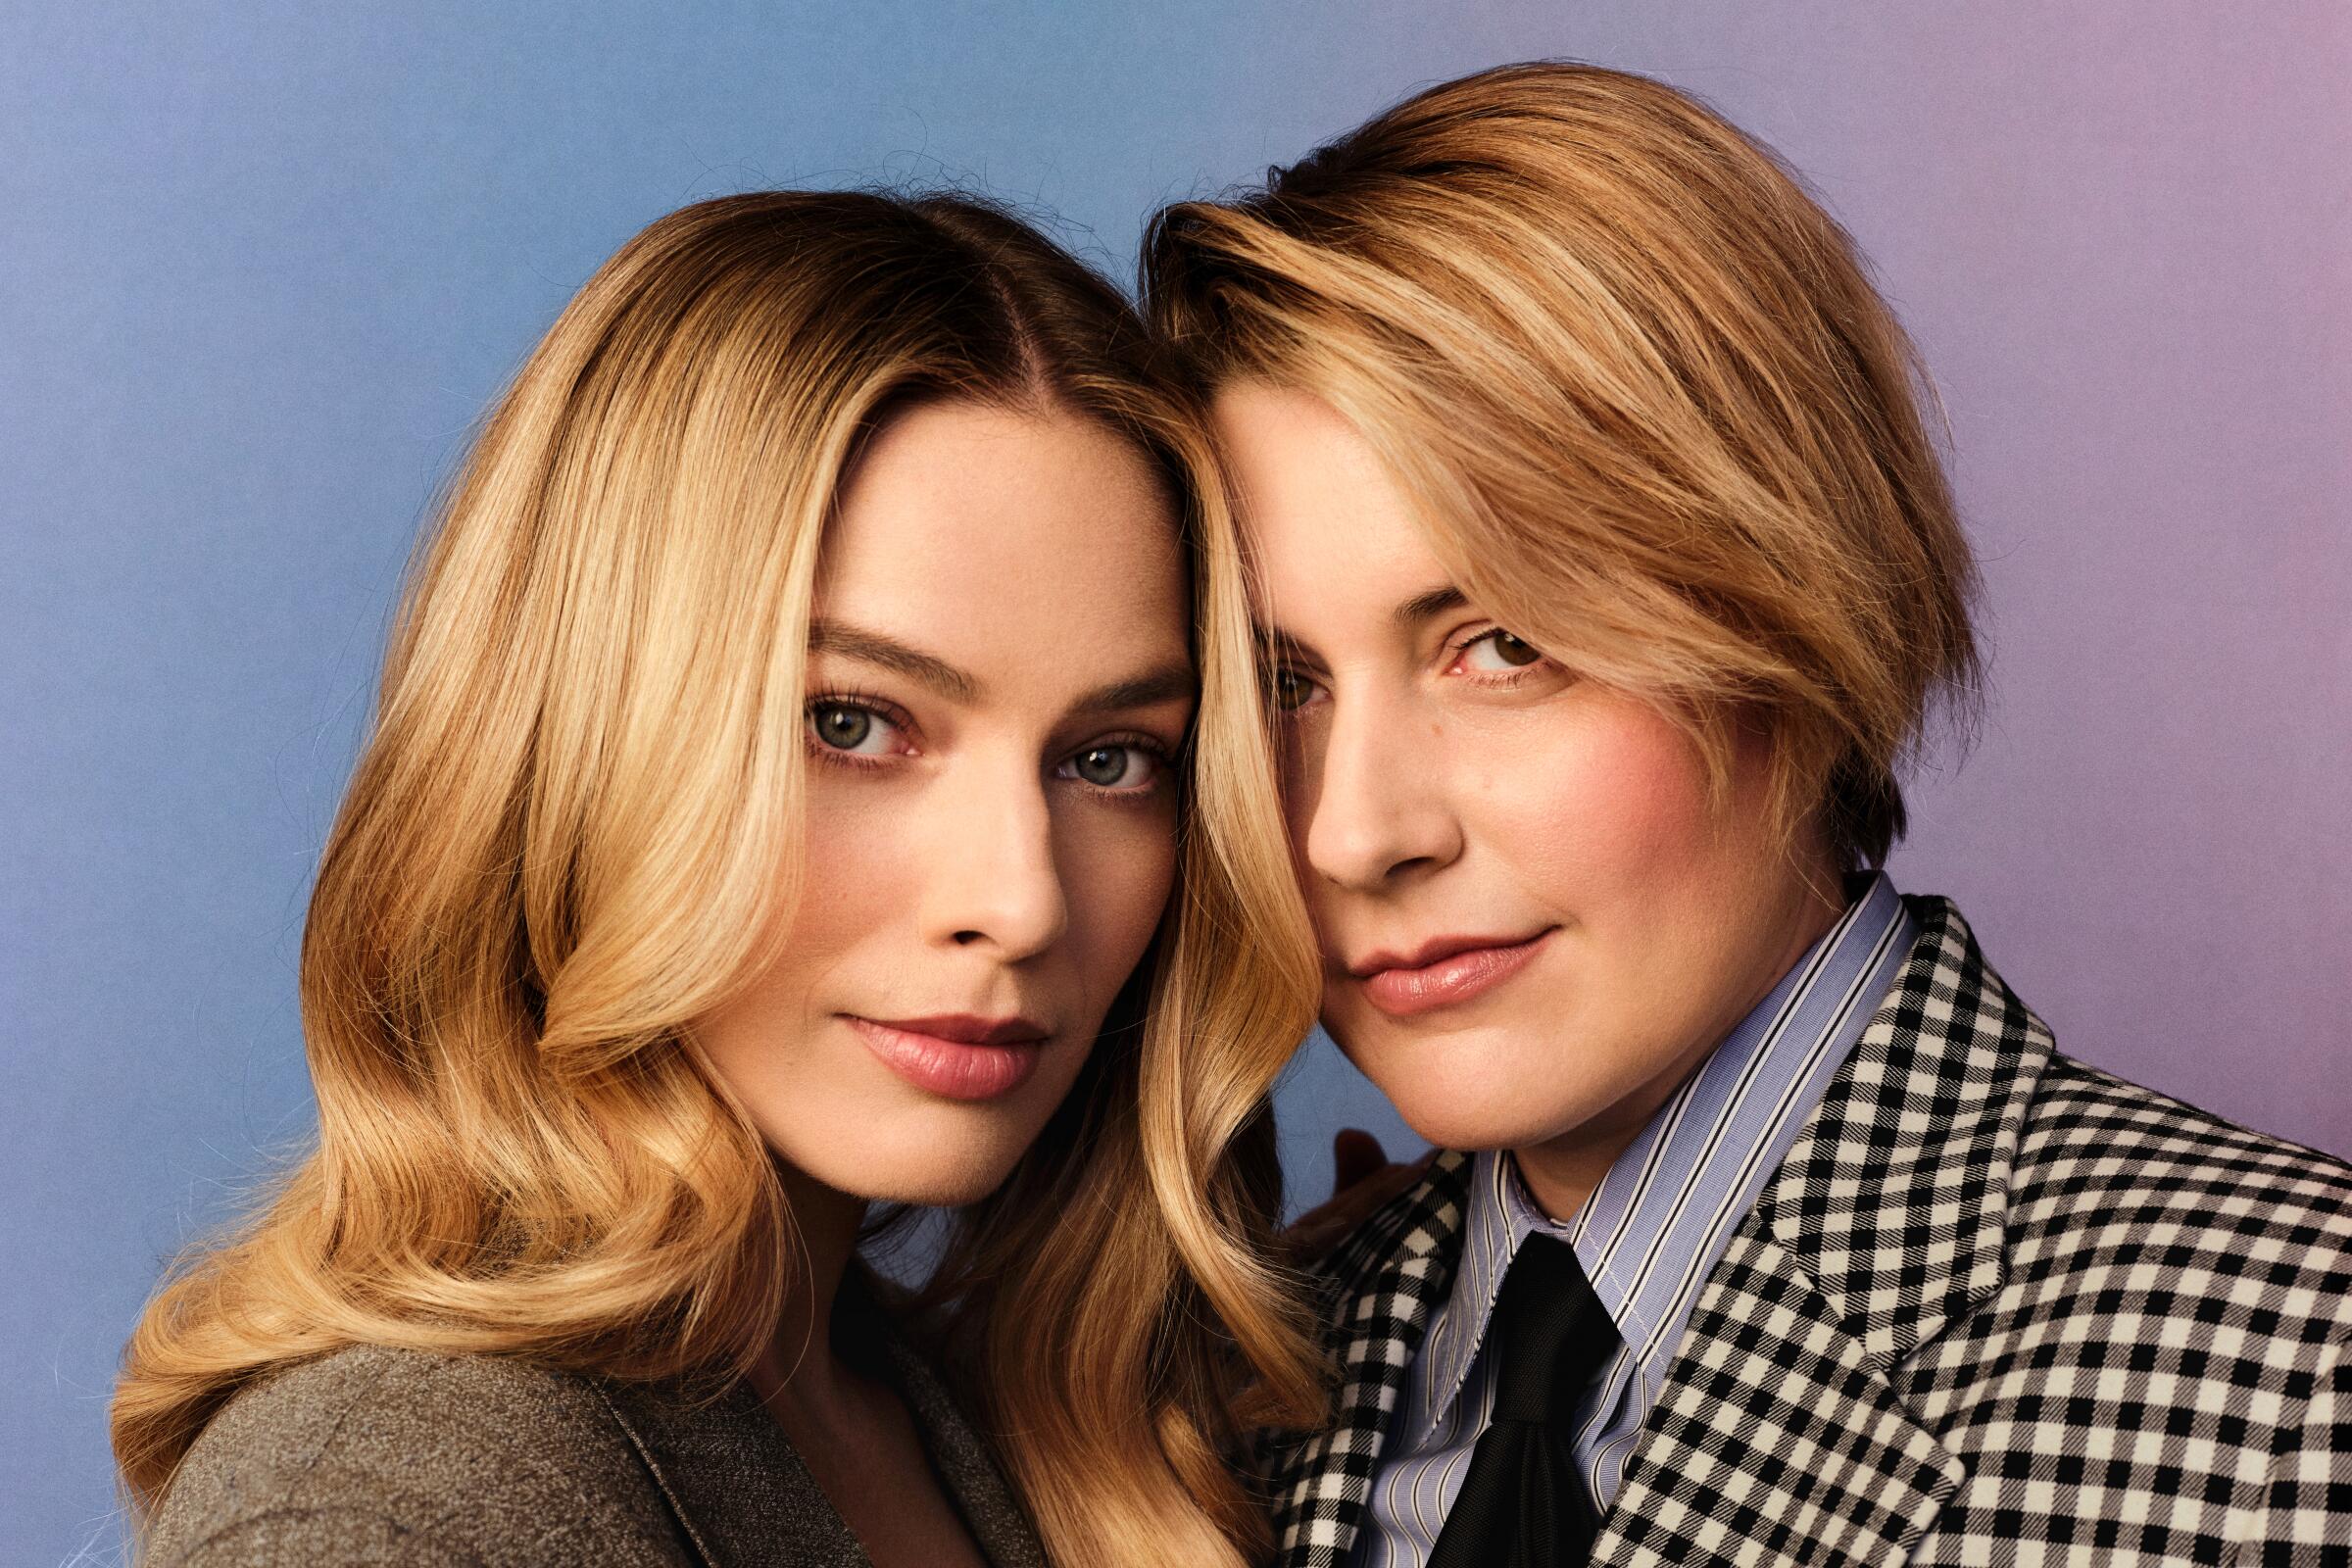 Margot Robbie and Greta Gerwig stand close together, heads touching.